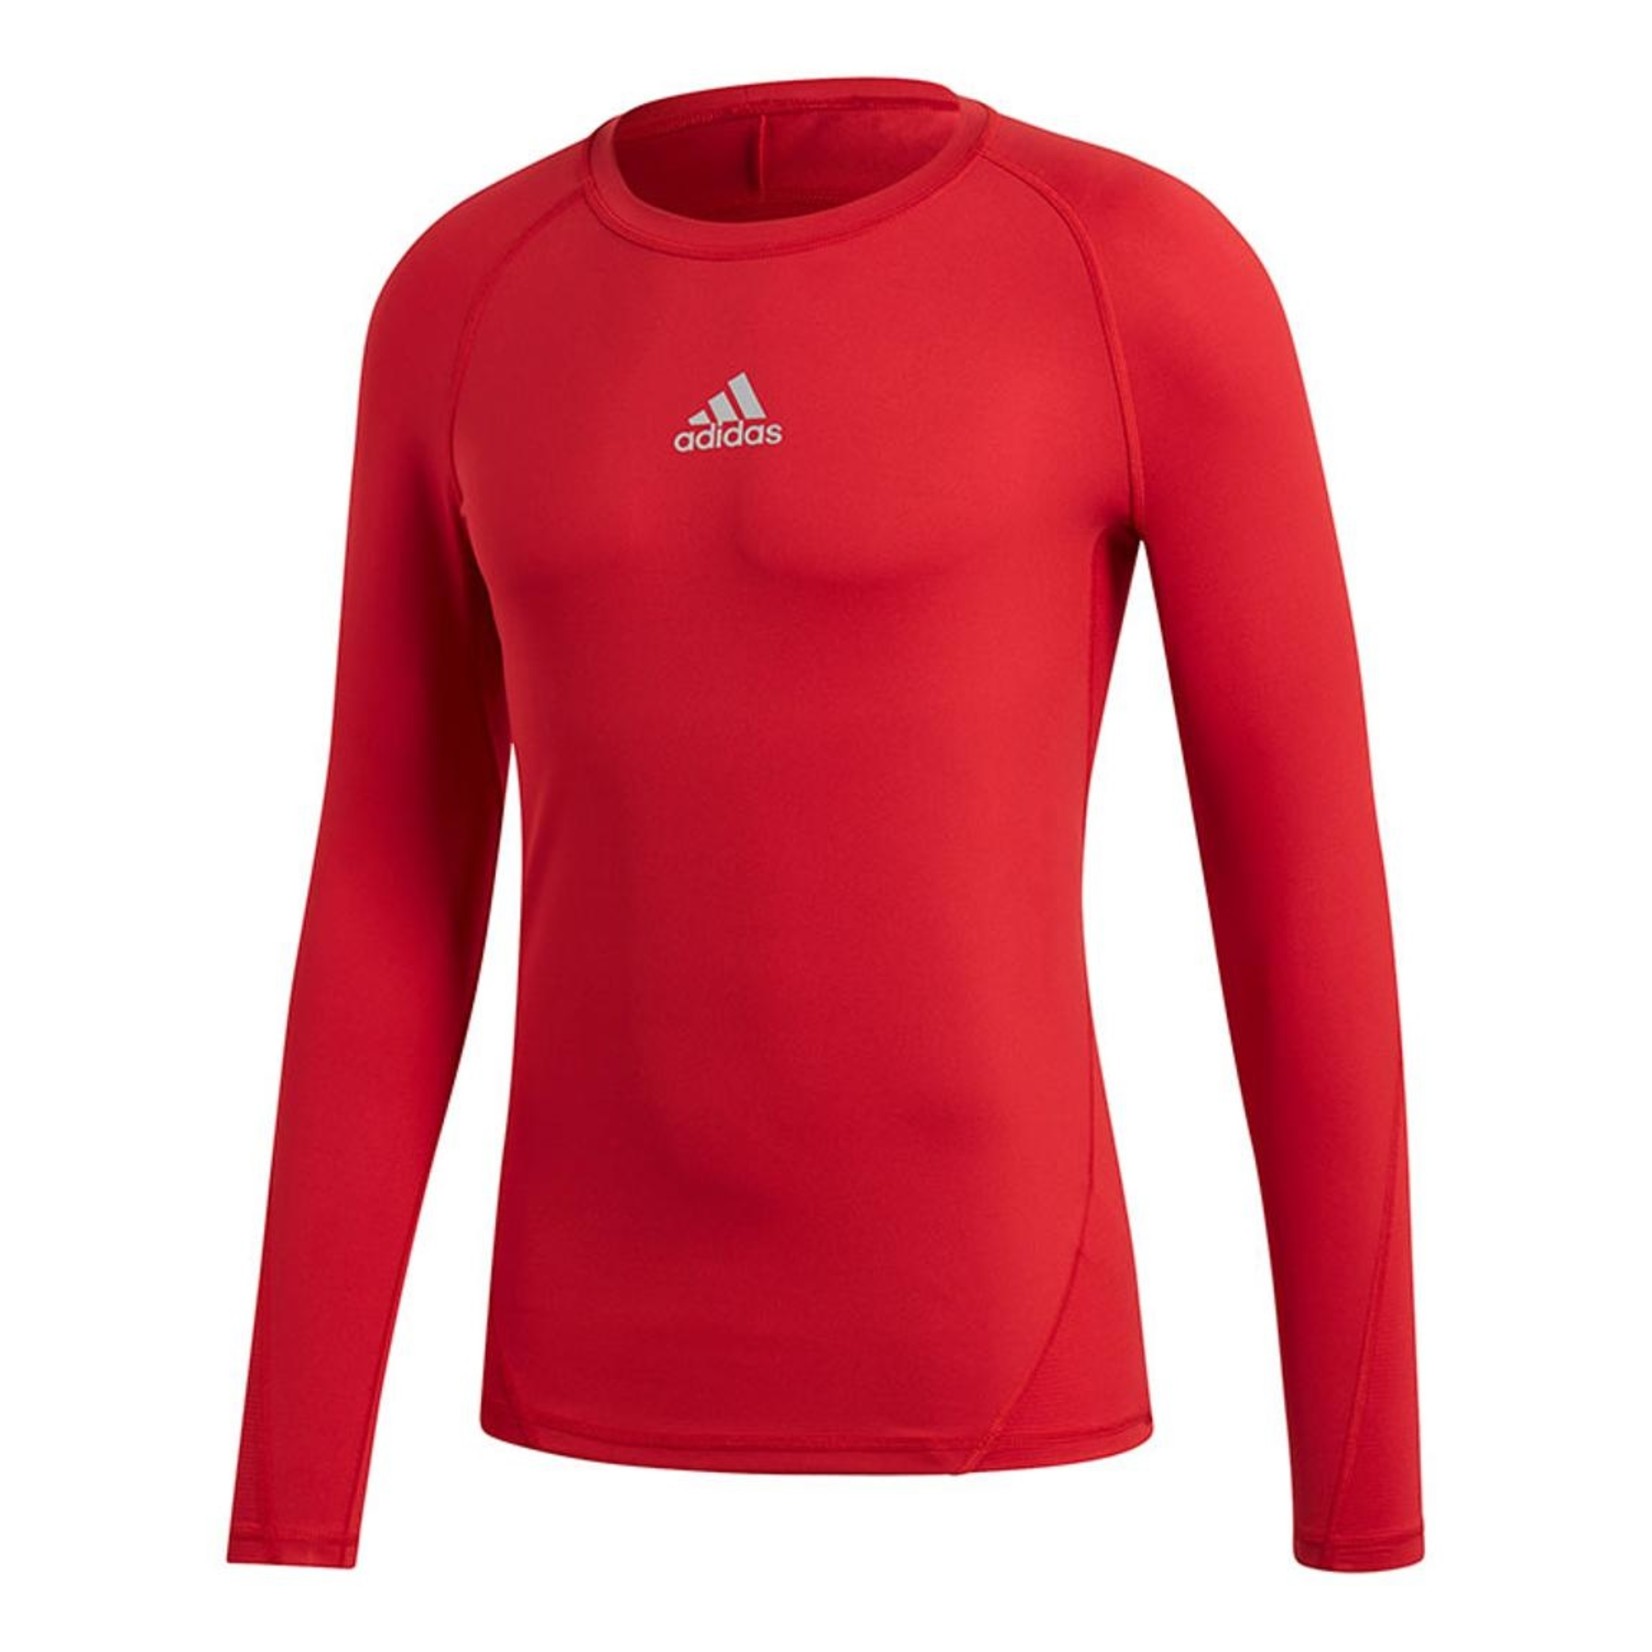 Adidas Compression Red Long Sleeve Youth